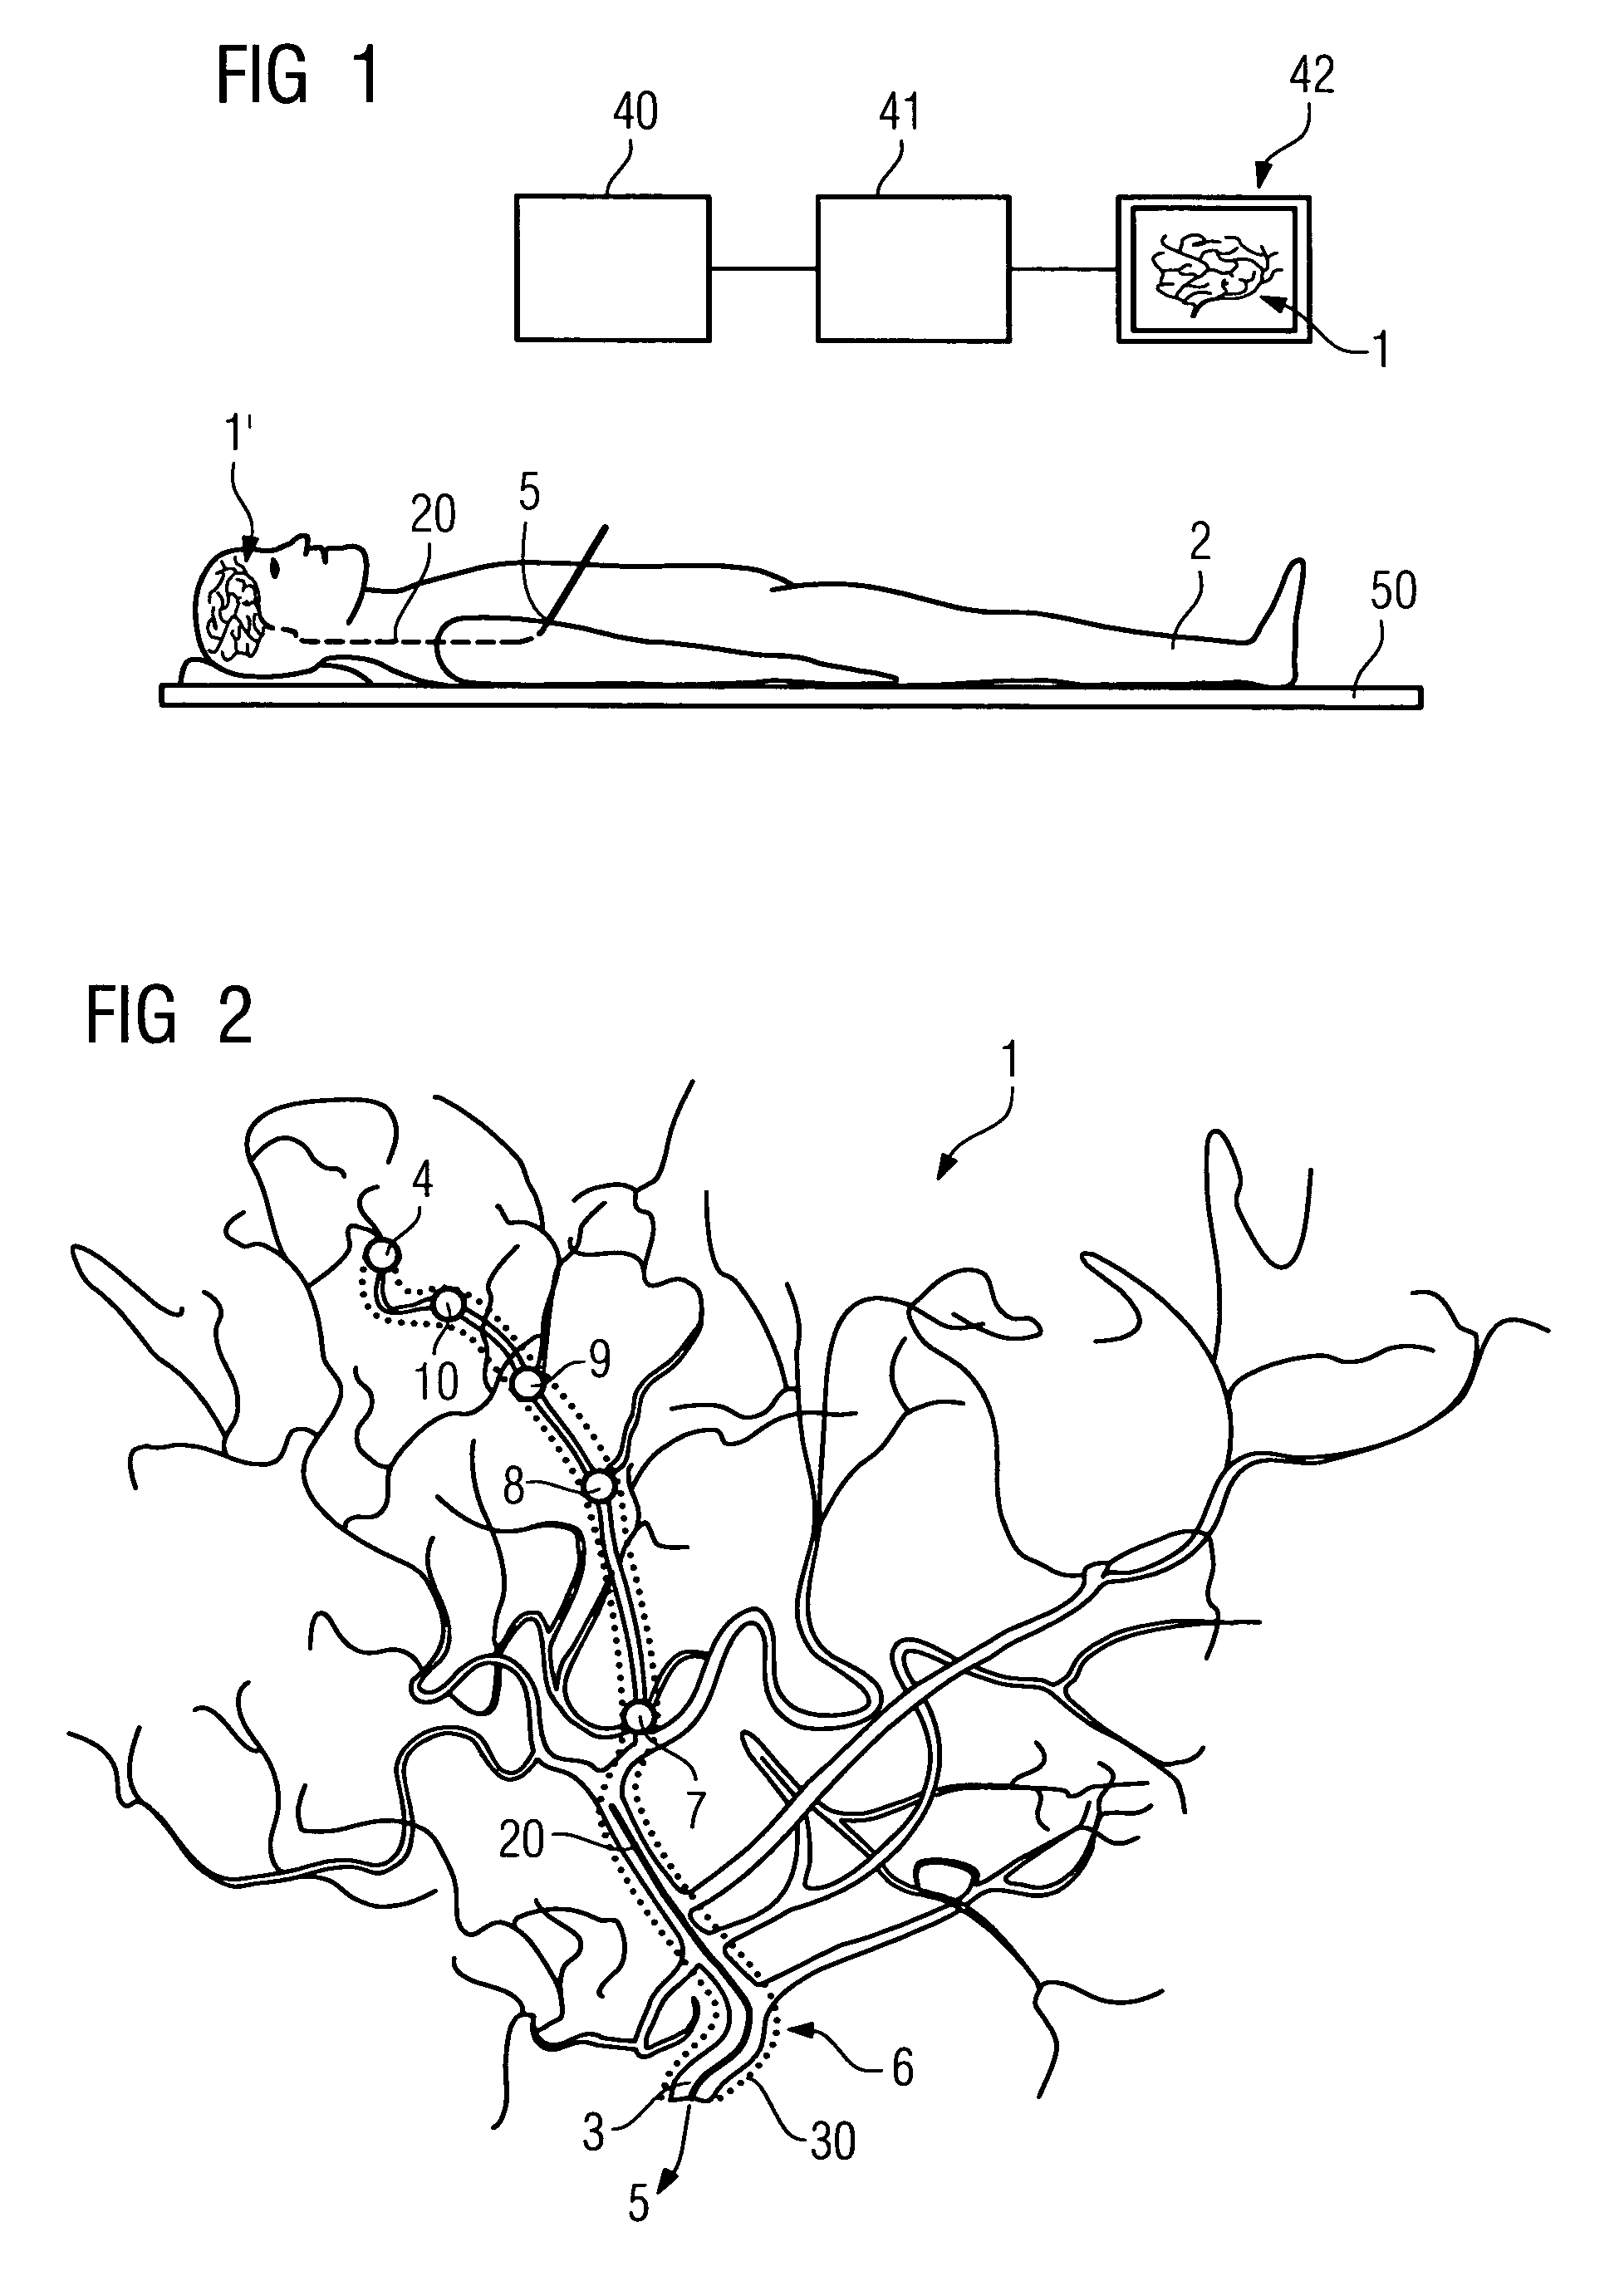 Method for displaying a hollow space in an object under investigation